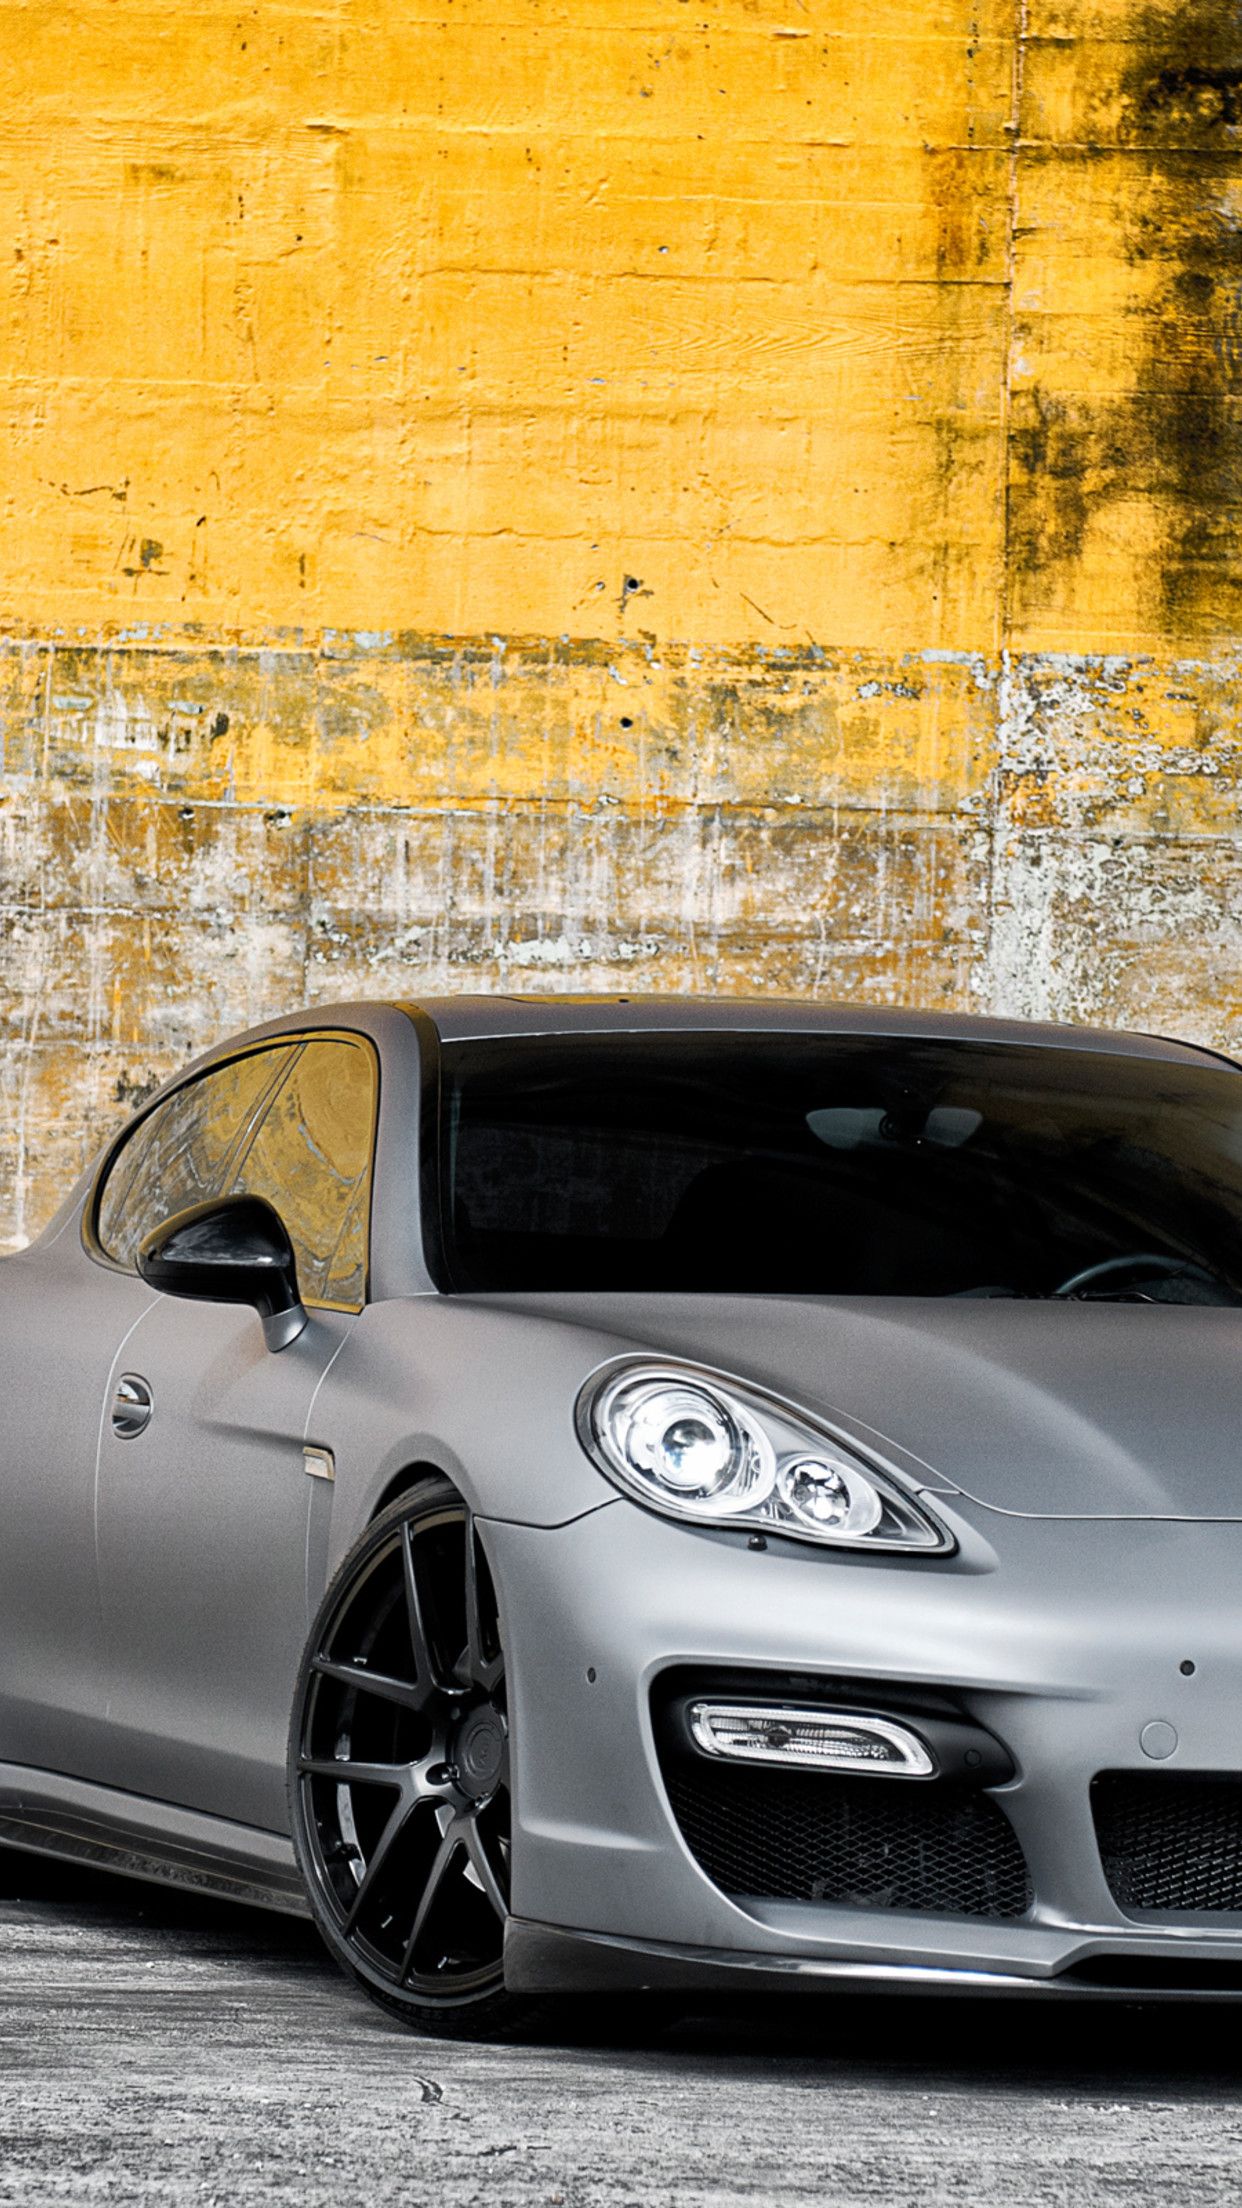 Porsche Panamera Wallpapers for iPhone 11, Pro Max, X, 8, 7, 6